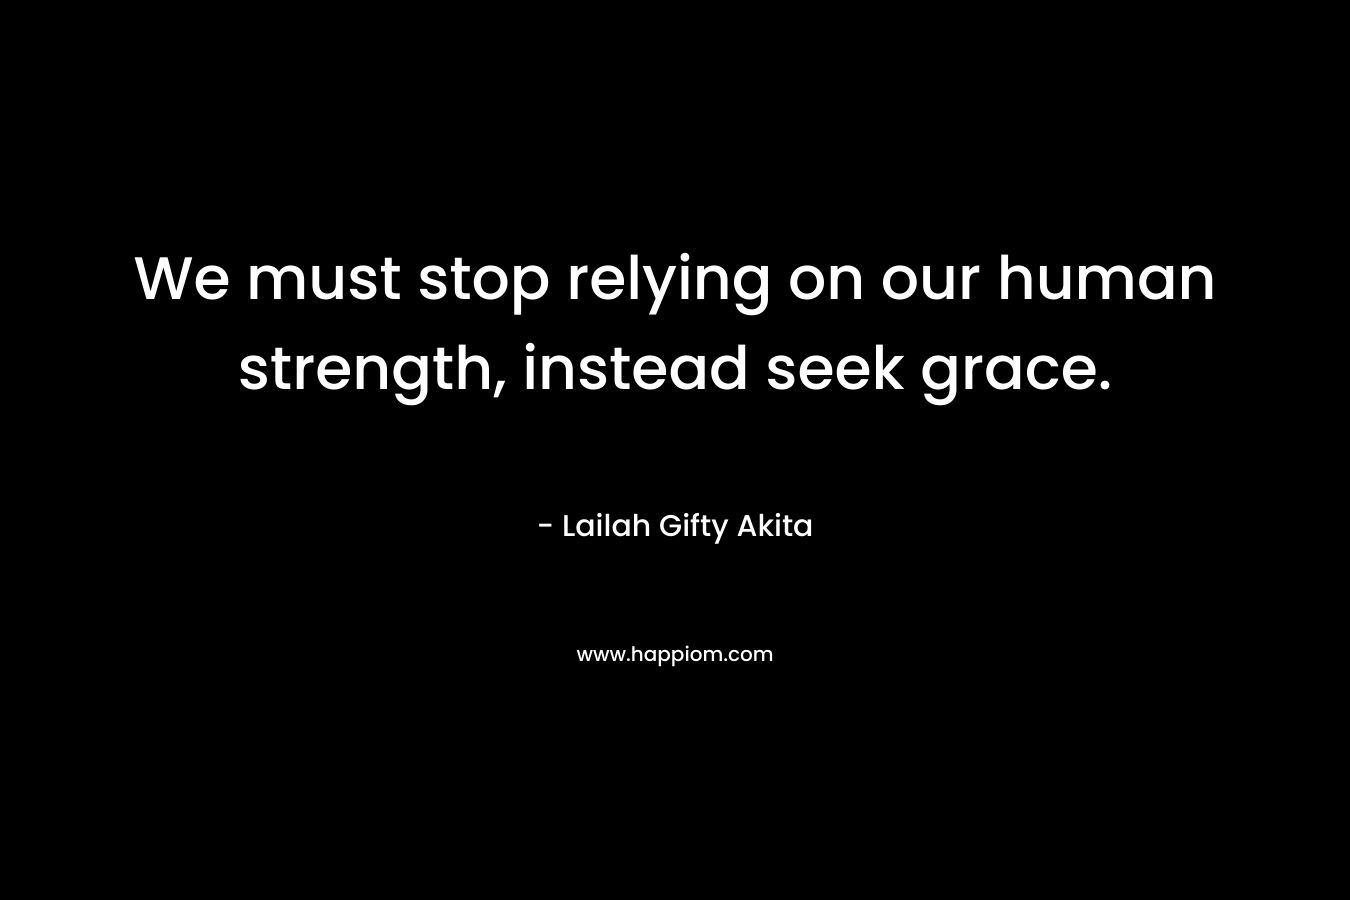 We must stop relying on our human strength, instead seek grace.